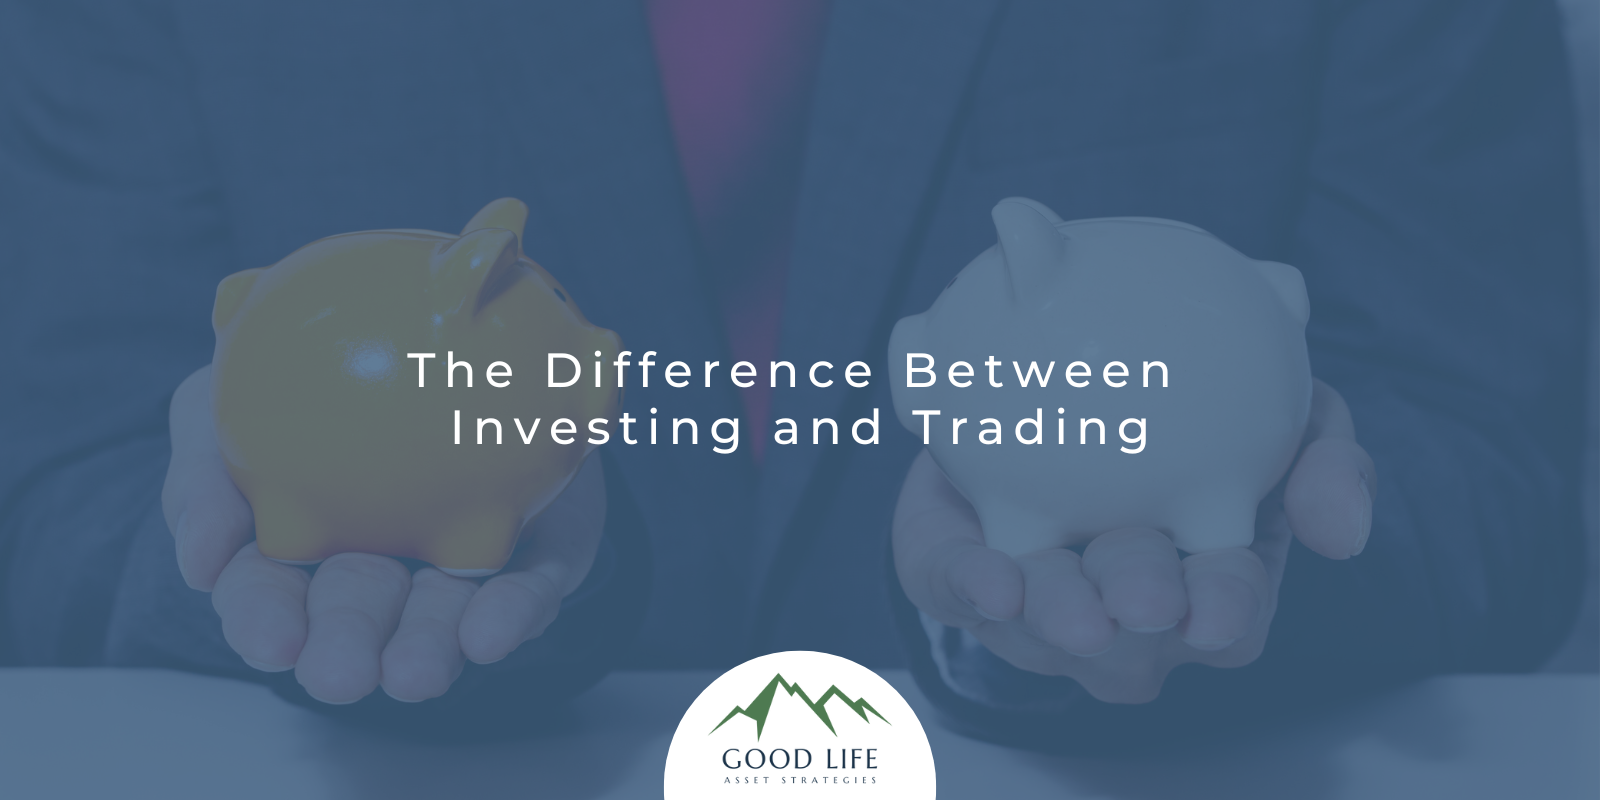 Know Your Terminology: The Difference Between Investing and Trading